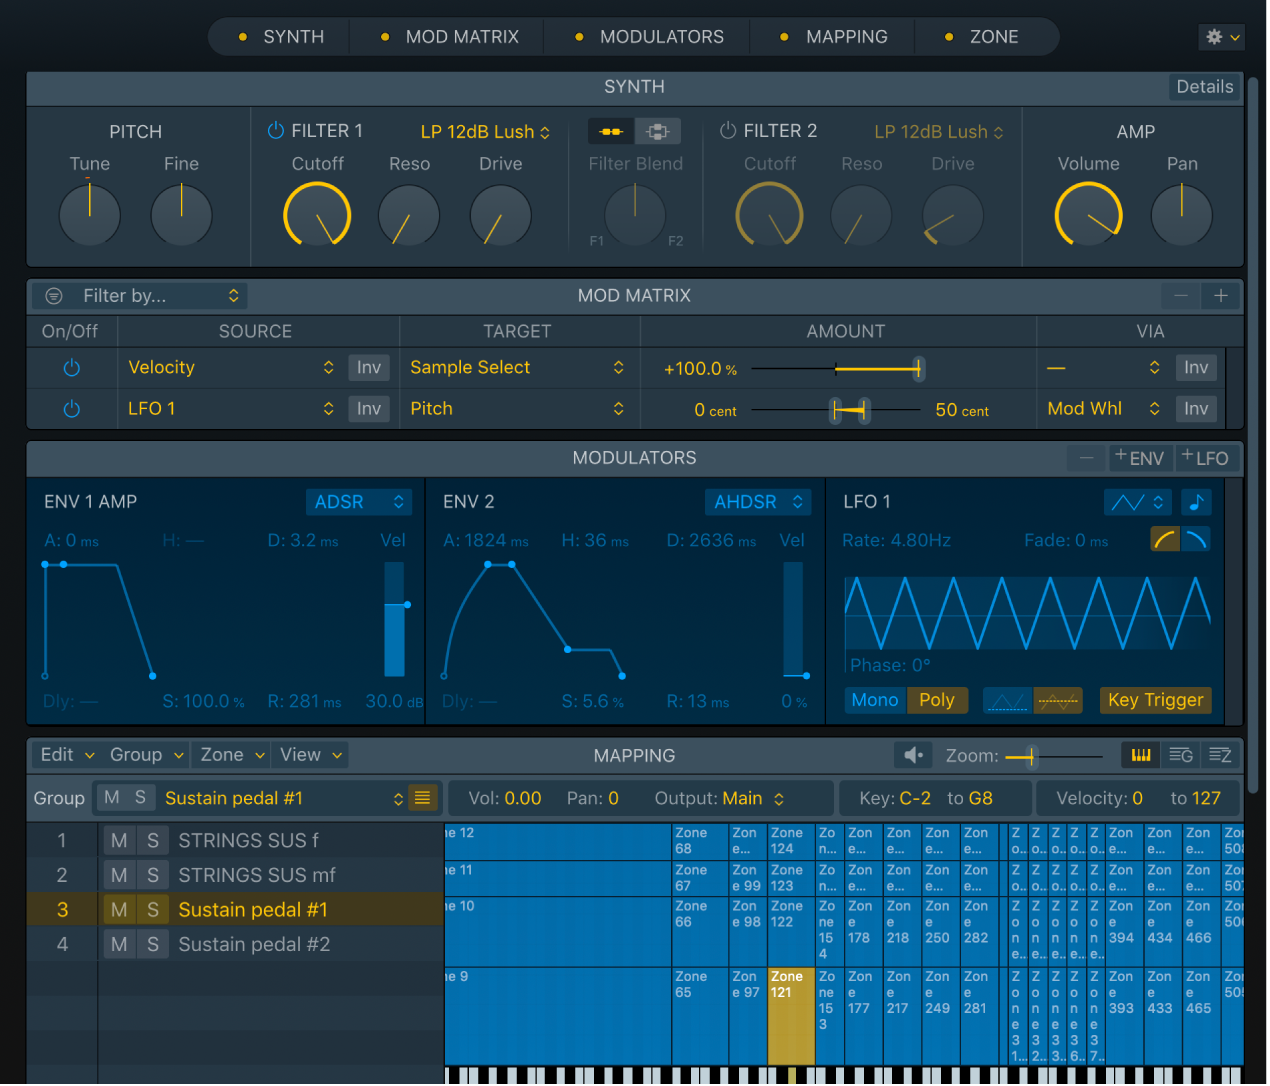 Figure. Sampler interface showing Synth, Mod Matrix, Modulators, and Mapping panes.